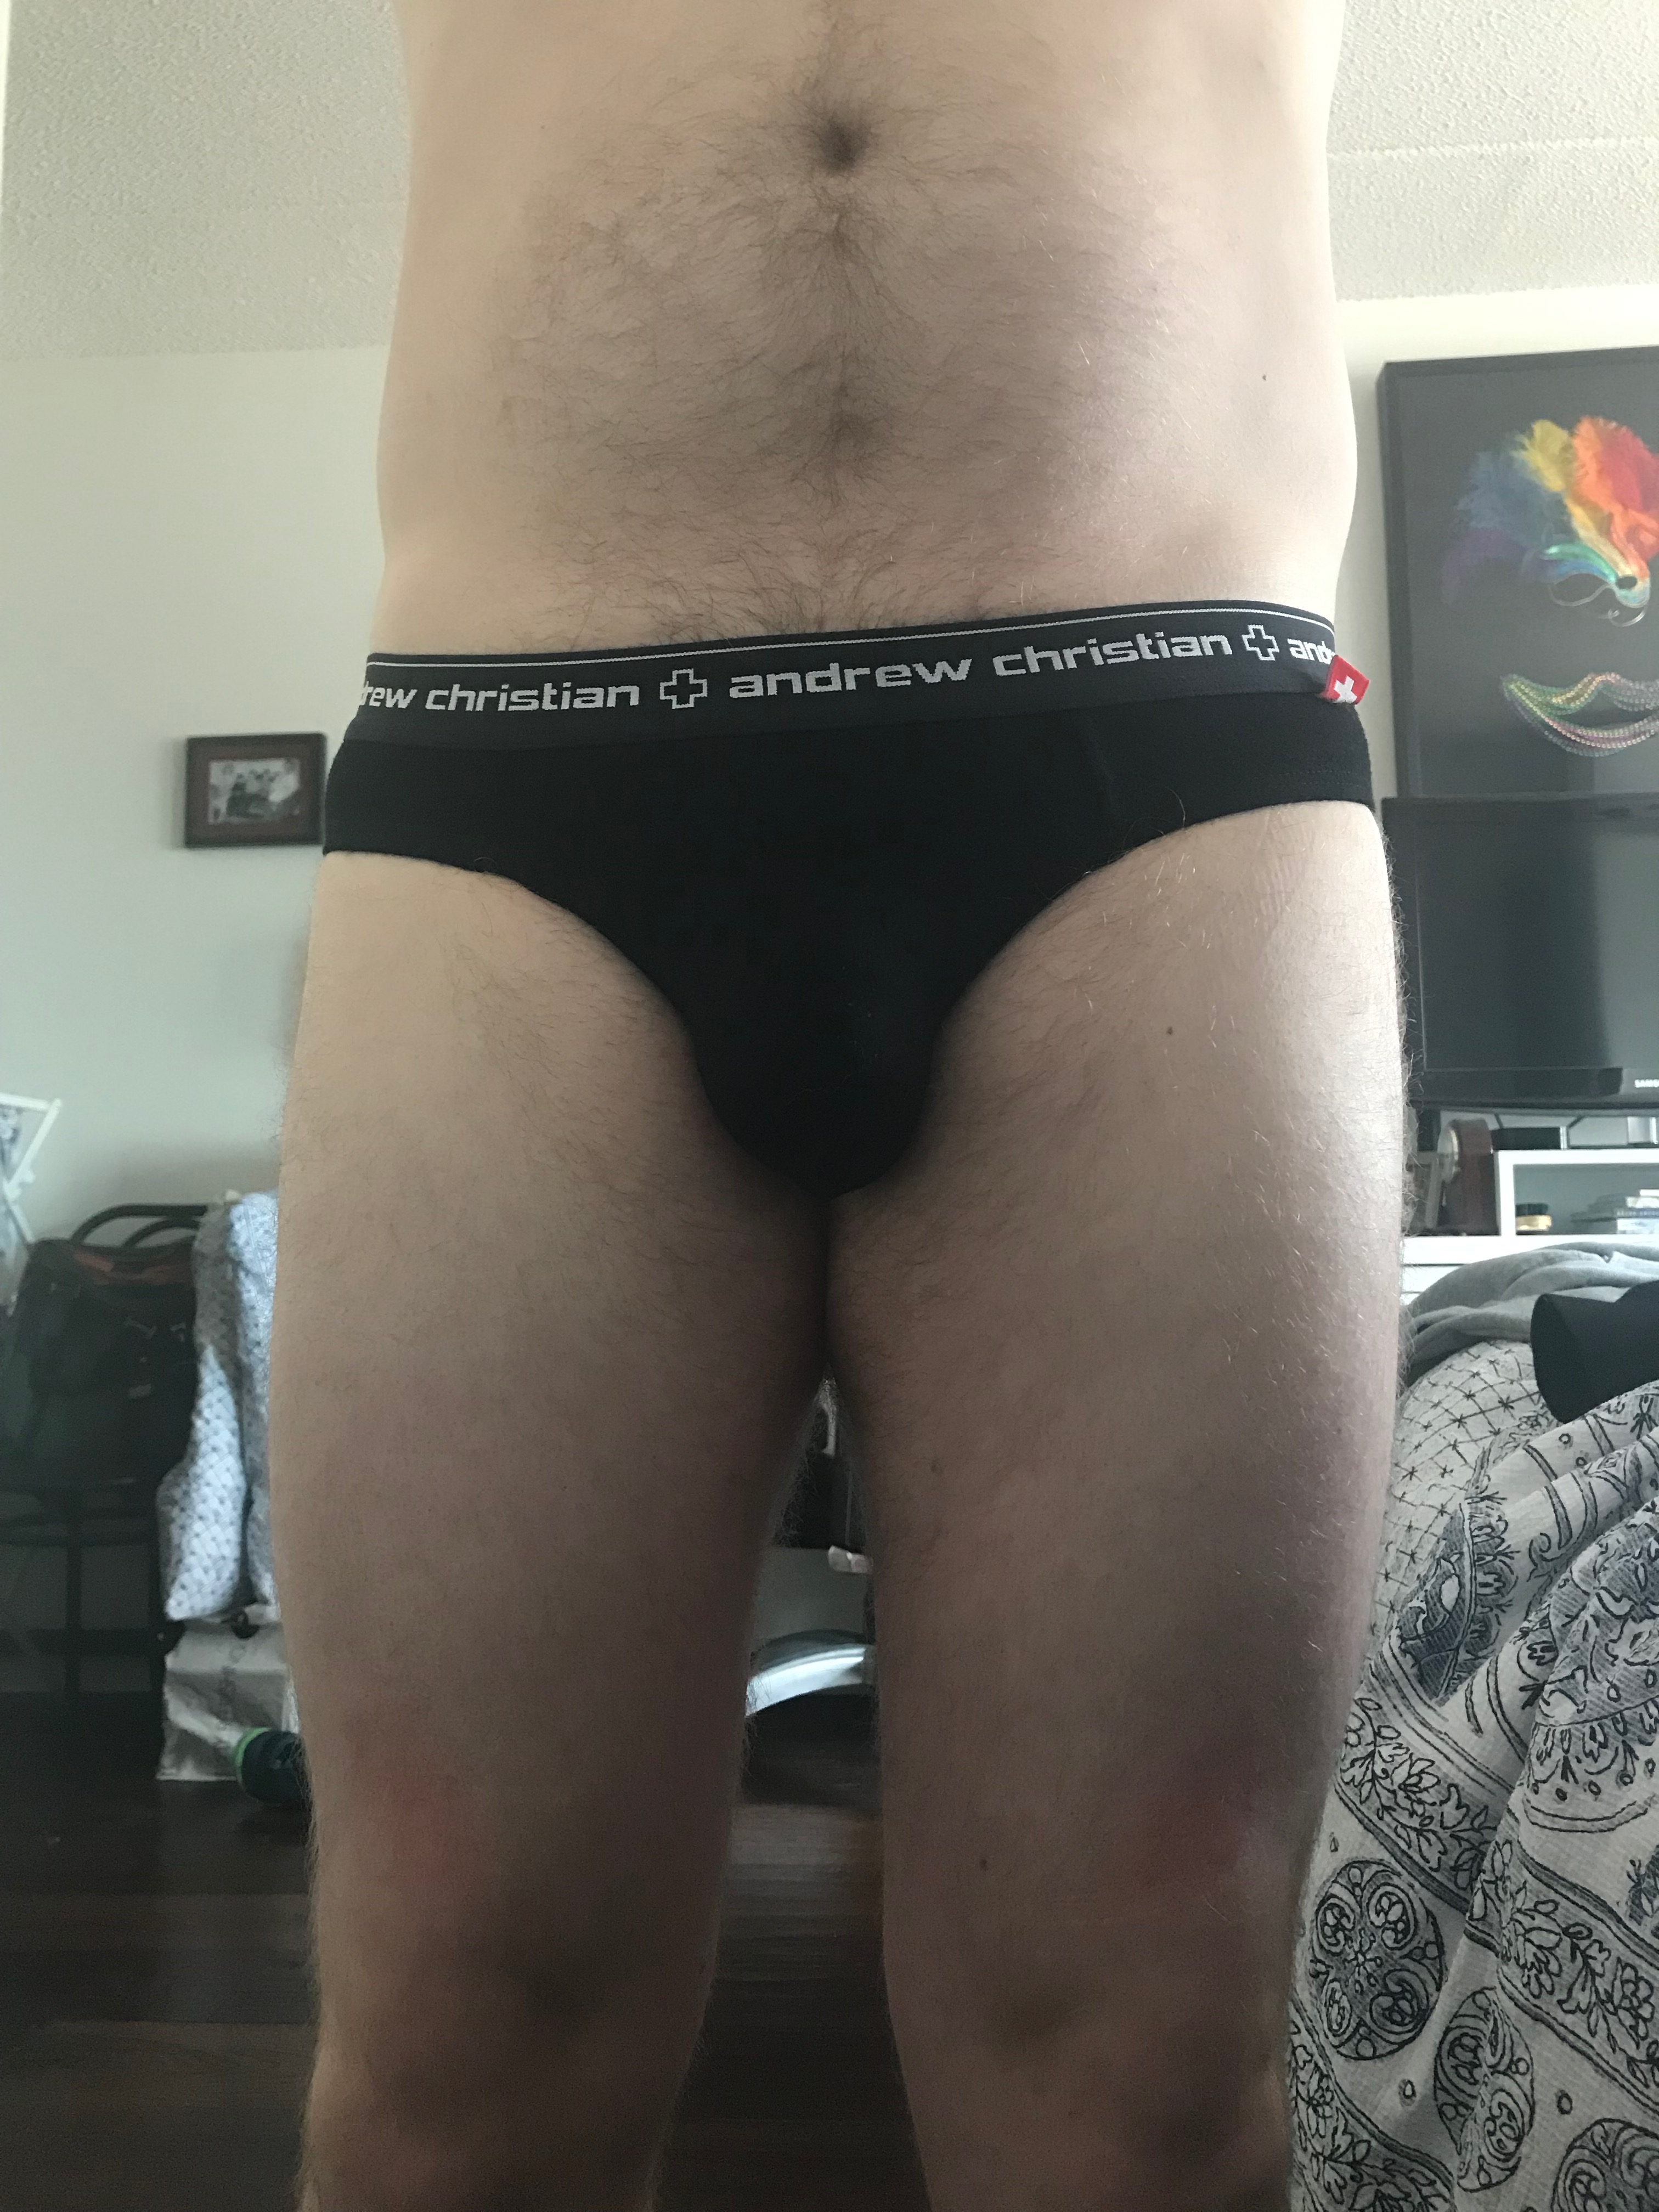 Basic Black Briefs to end the week that was…